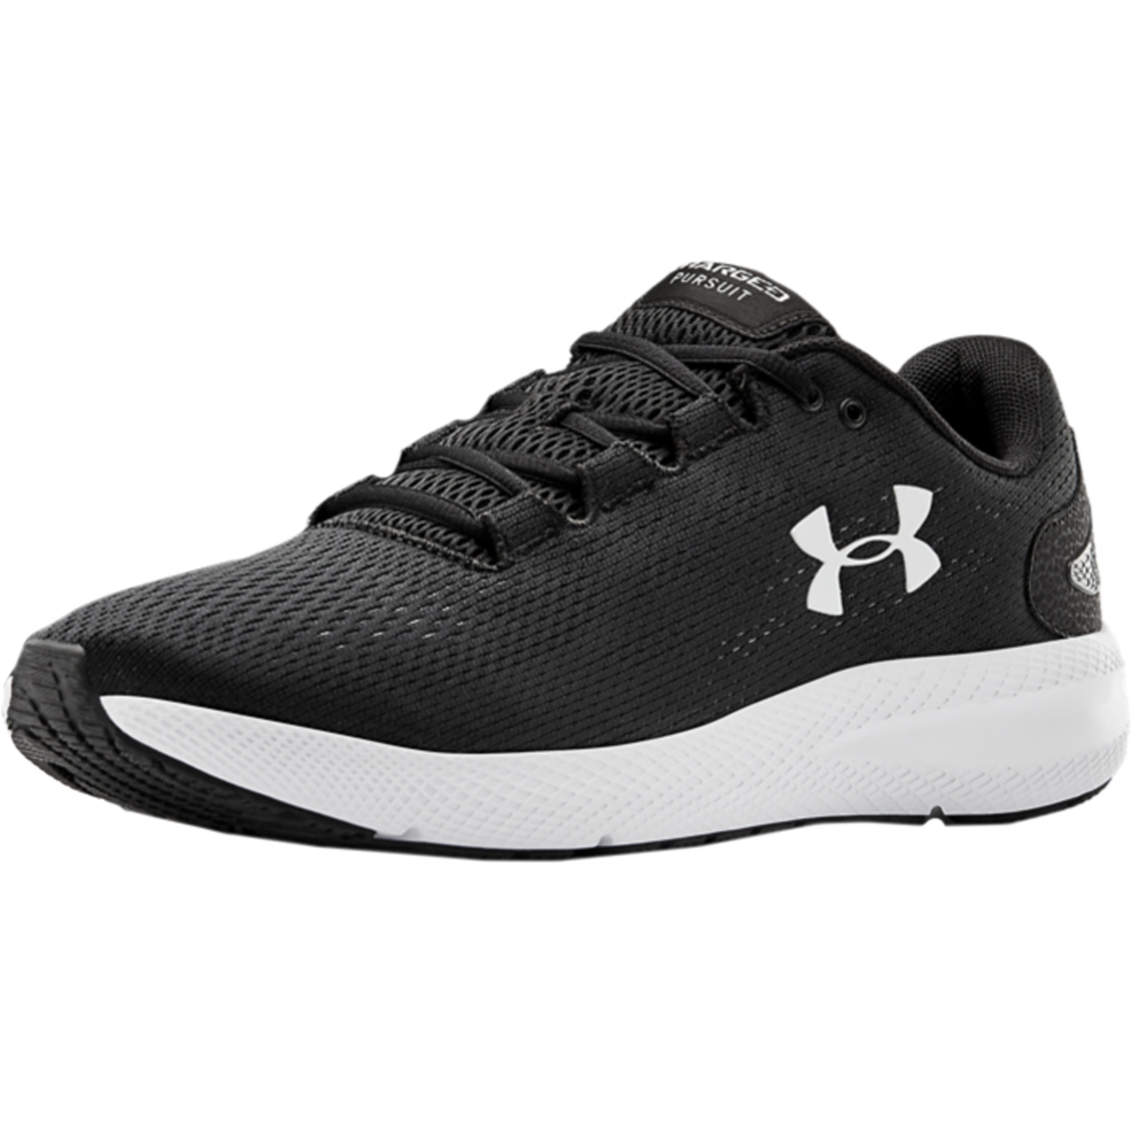 Charged Pursuit 2 Running Shoes Black 